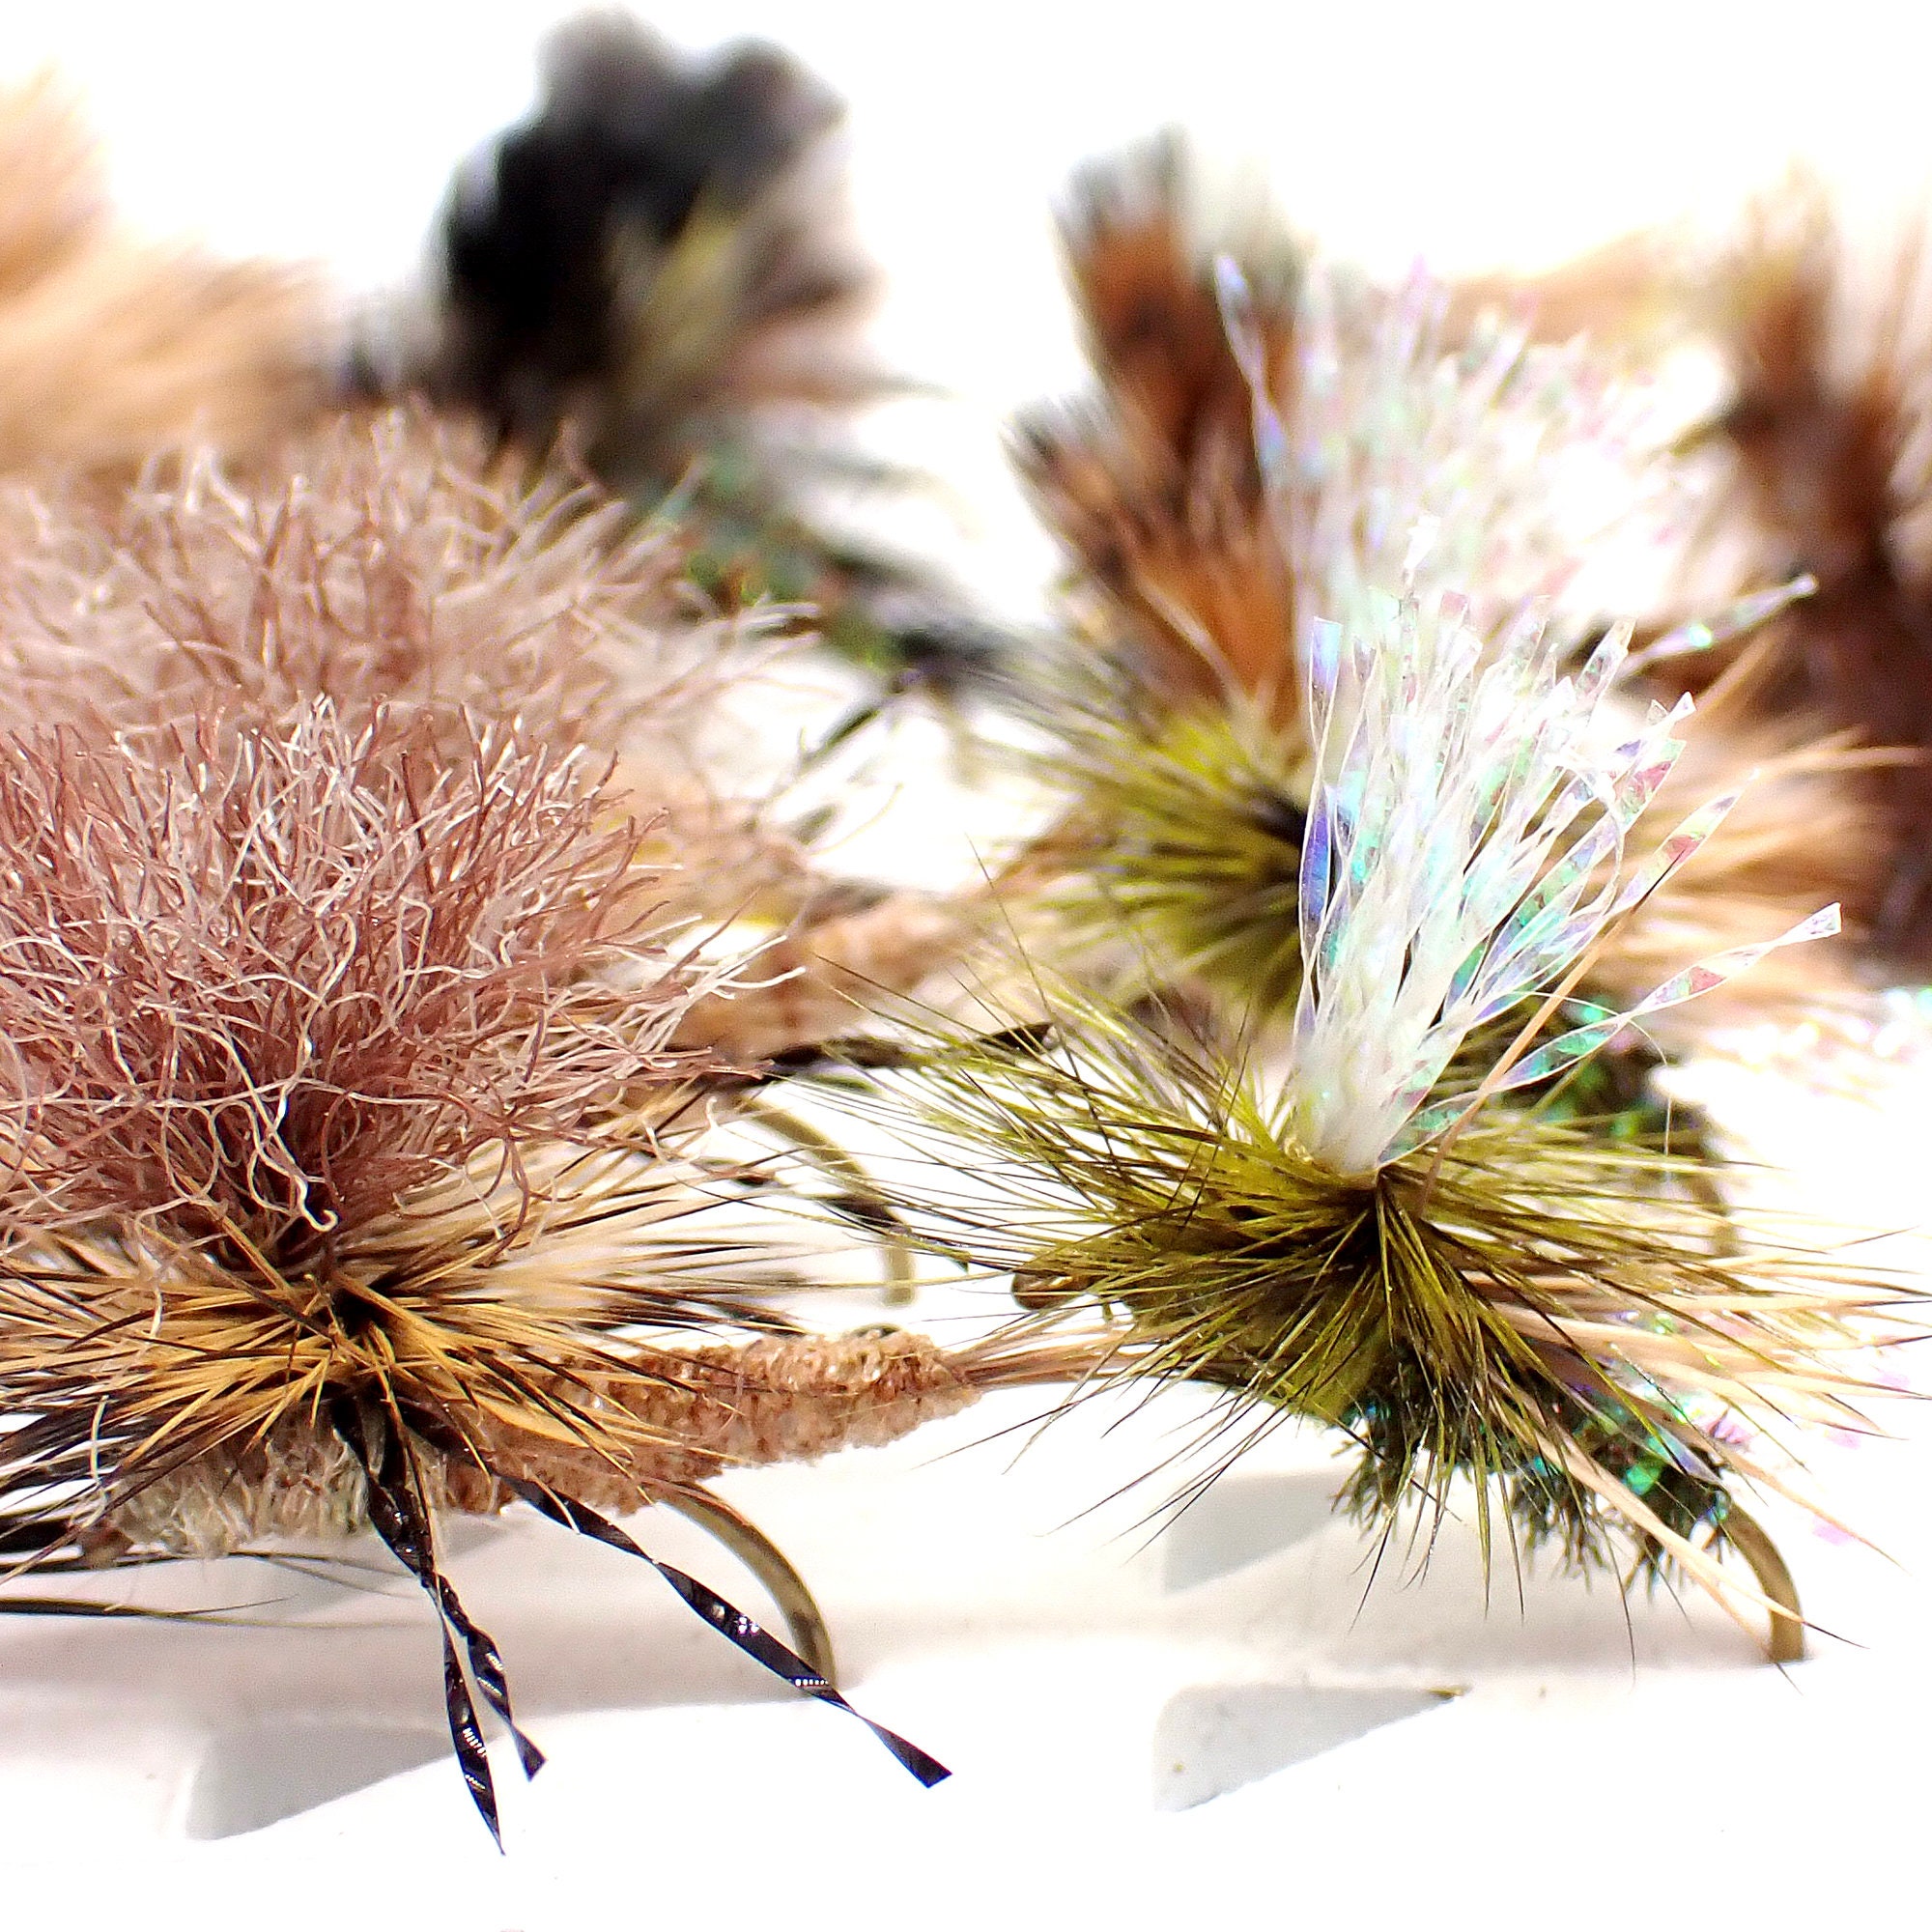 Dry Fly Attractor Psycho Stimulator Pink Yellow Dry Flies for Trout Fishing  Best Dry Fly Patterns 3 Pack of Premium Dry Flies 